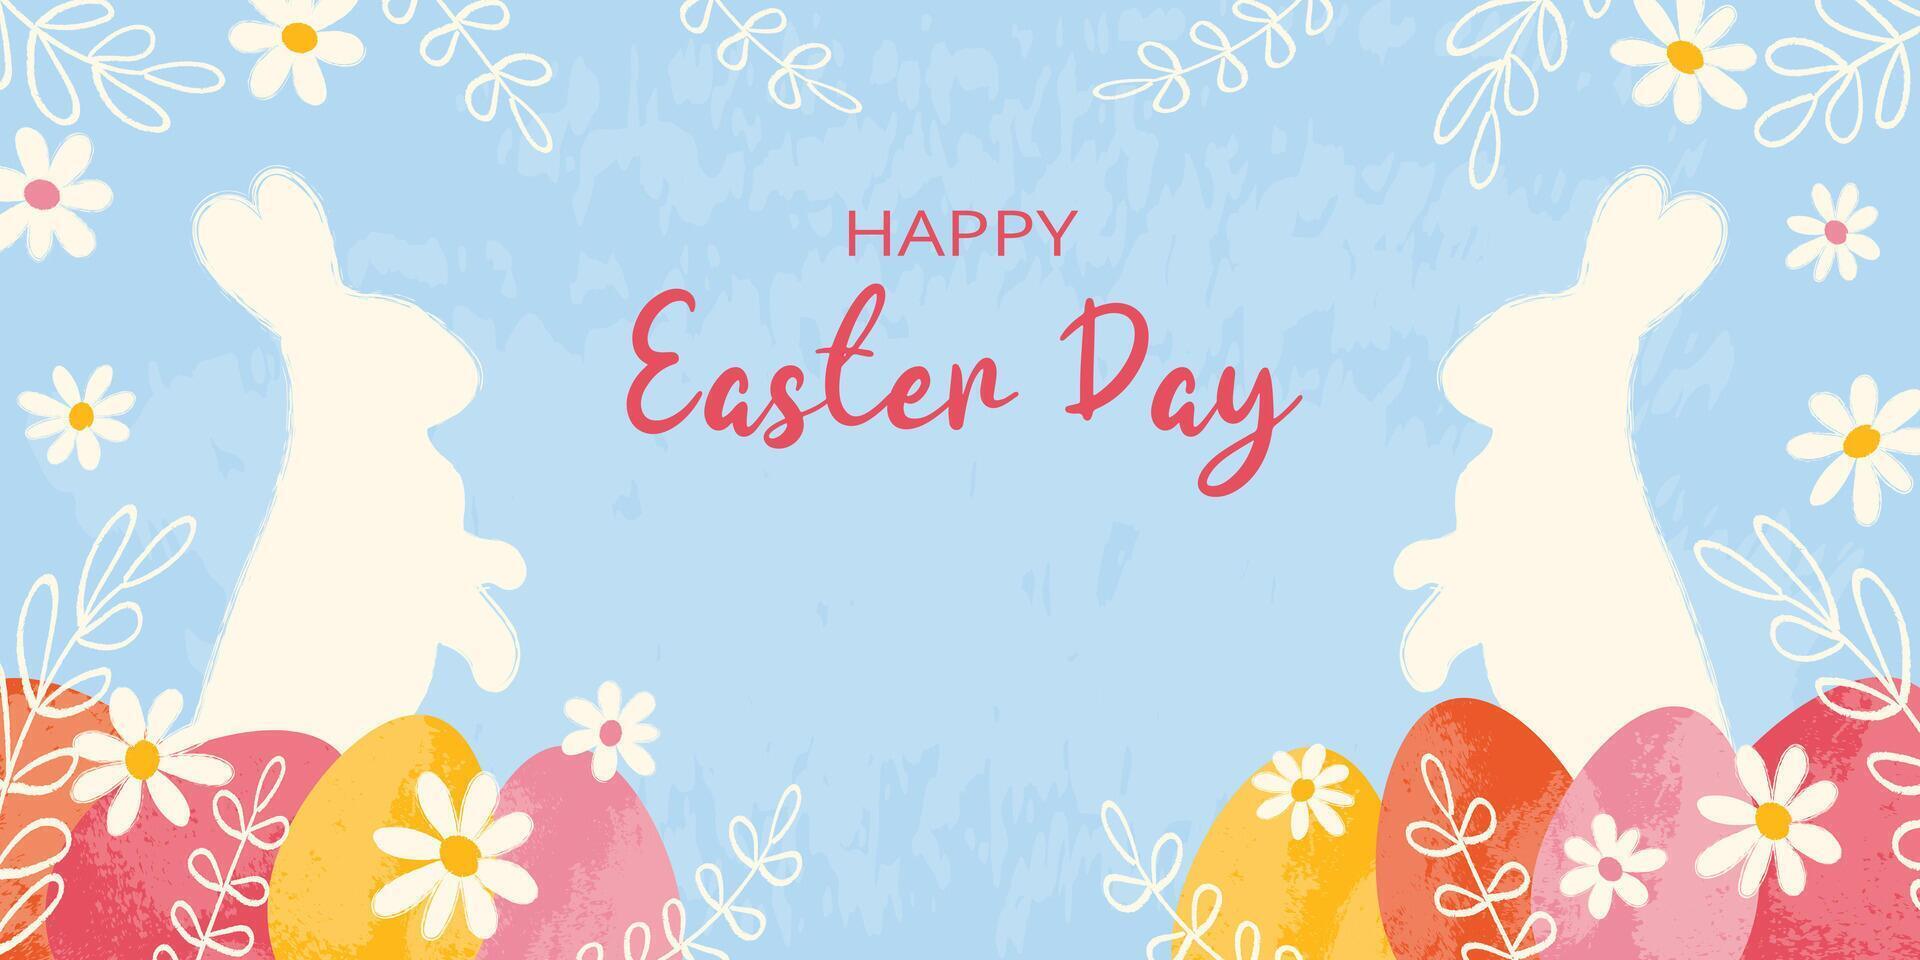 Rectangular festive background decorated hand drawn blooming flowers, two white rabbits and multicolored eggs for Happy Easter Day. Flat vector grunge textured illustration on blue backdrop